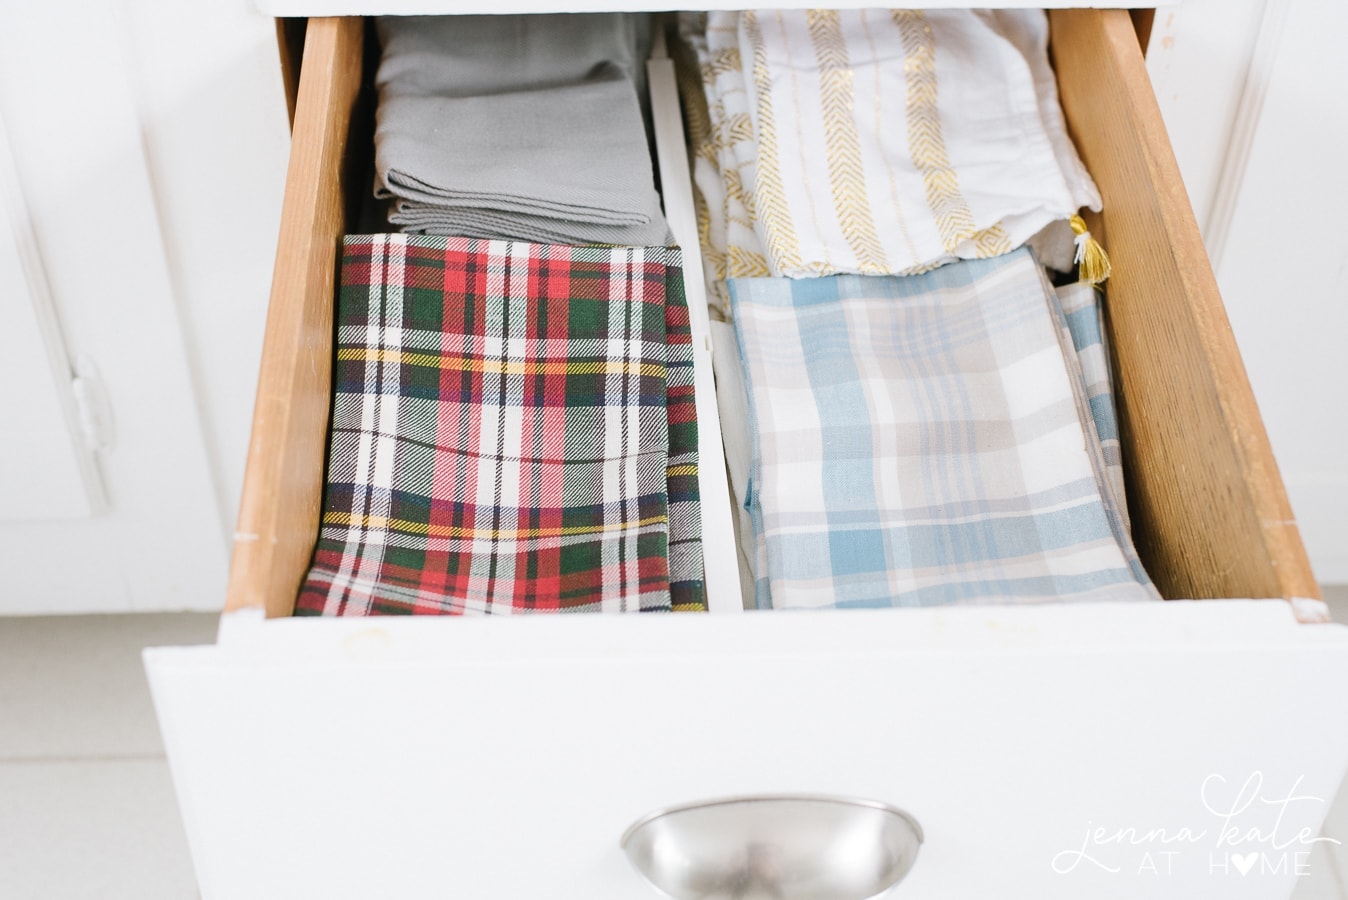 How to organize kitchen drawers